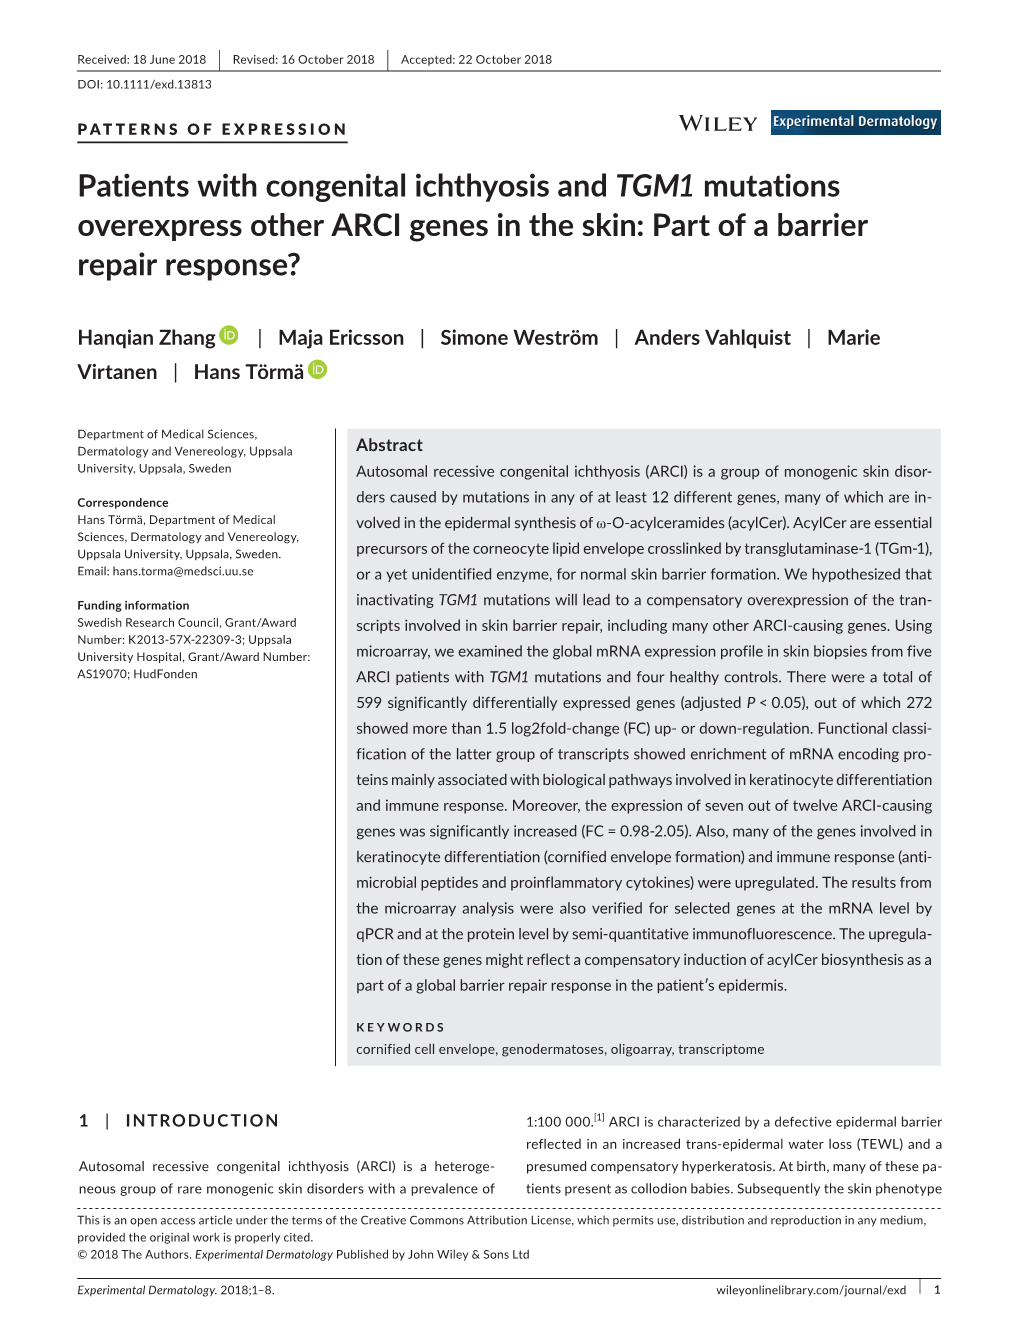 Patients with Congenital Ichthyosis and TGM1 Mutations Overexpress Other ARCI Genes in the Skin: Part of a Barrier Repair Response?